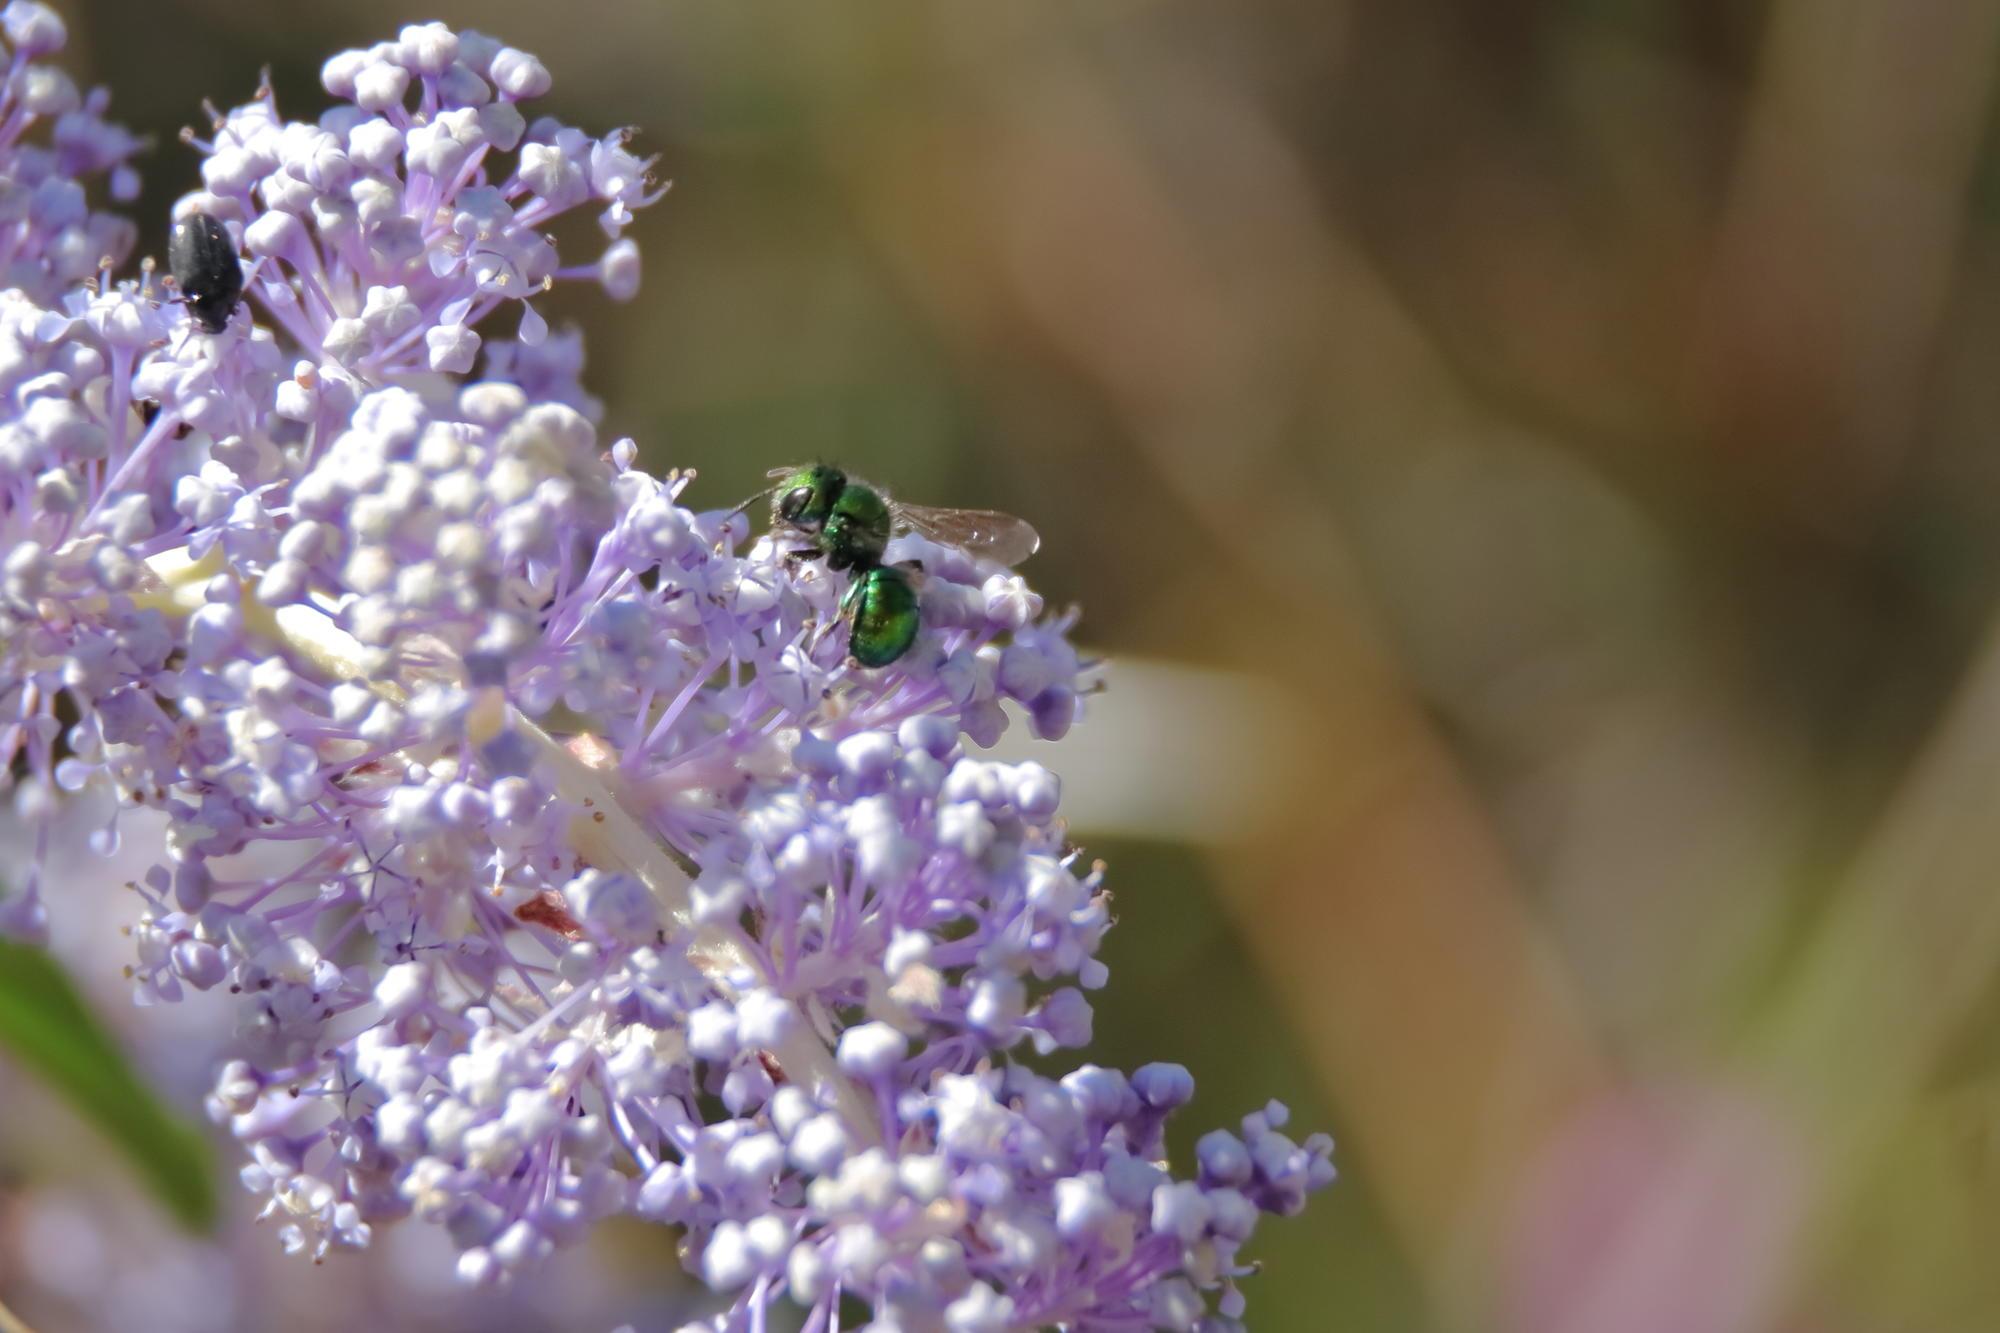 small green bee on lilac-type flower